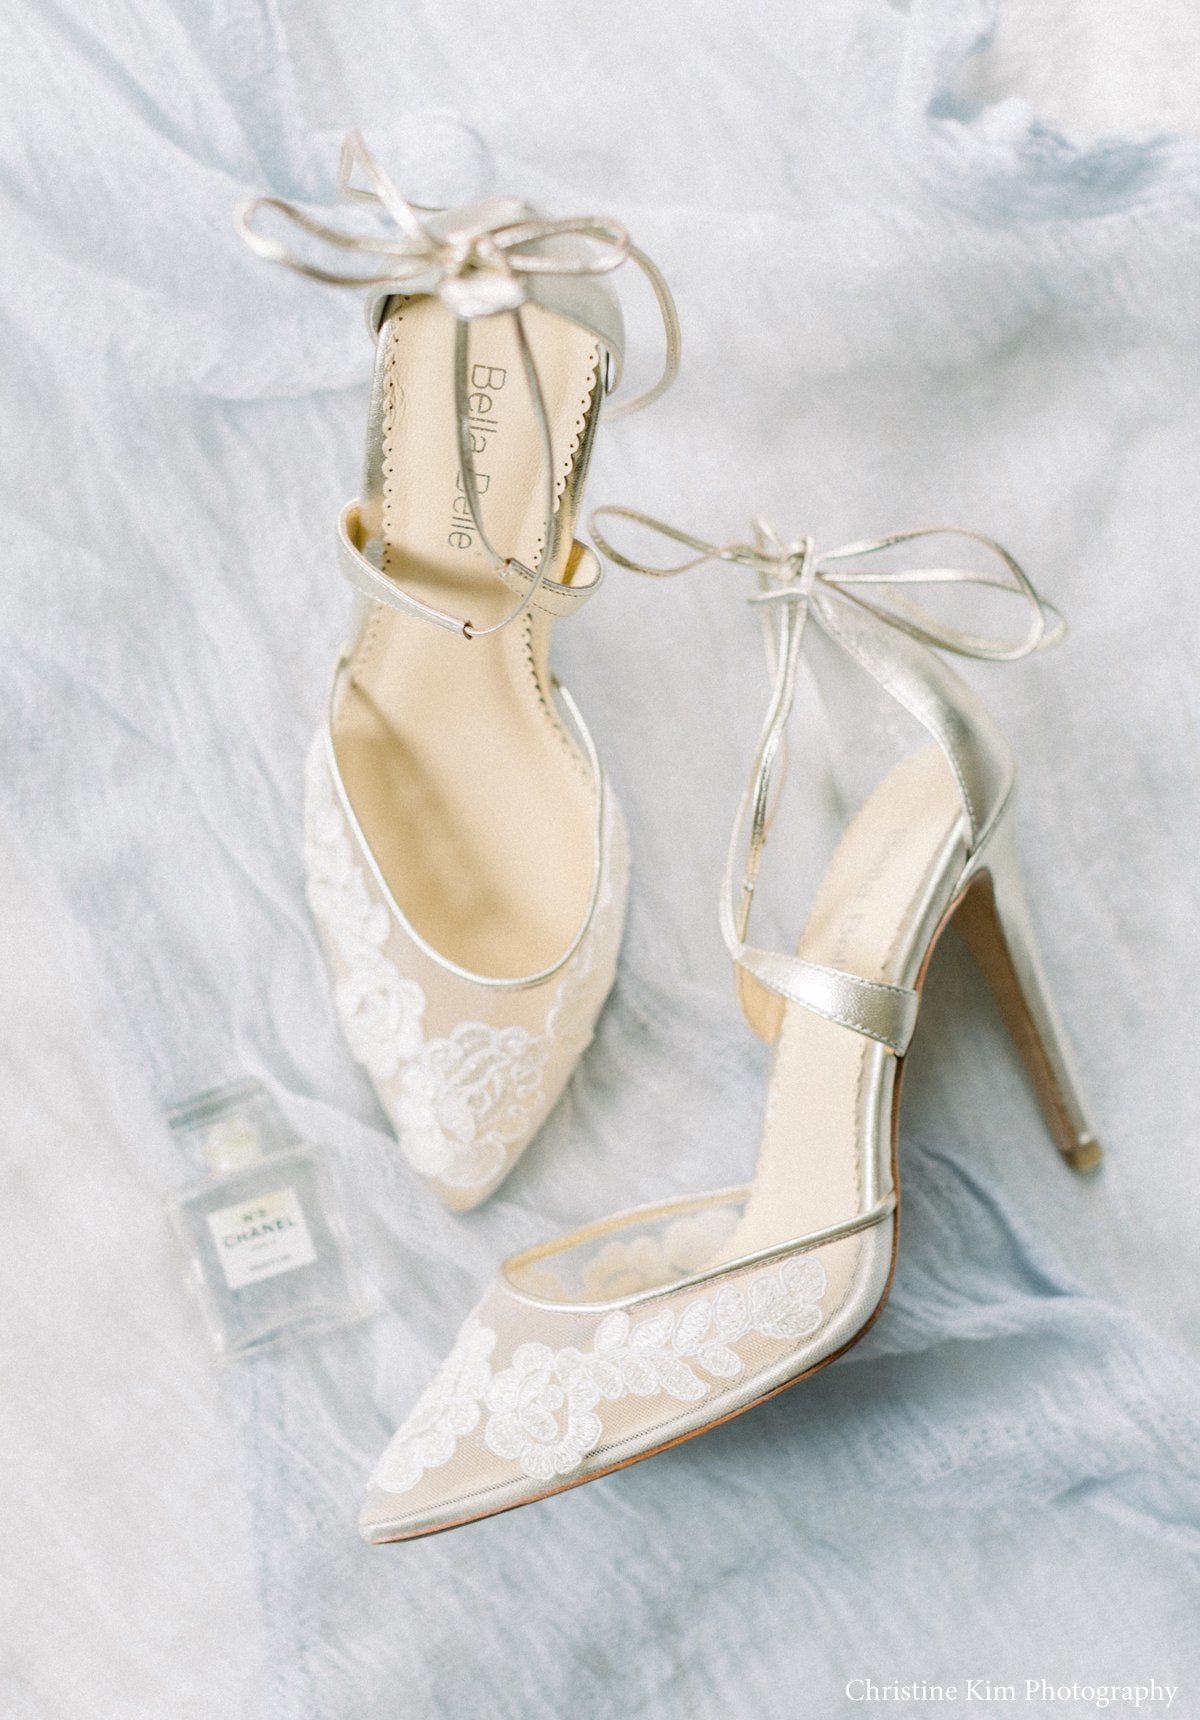 32 Floral Wedding Shoes Ideas For Spring And Summer Nuptials White Platform Shoes With Gold Cherry Floral Wedding Shoe Quinceanera Shoes Summer Wedding Shoes